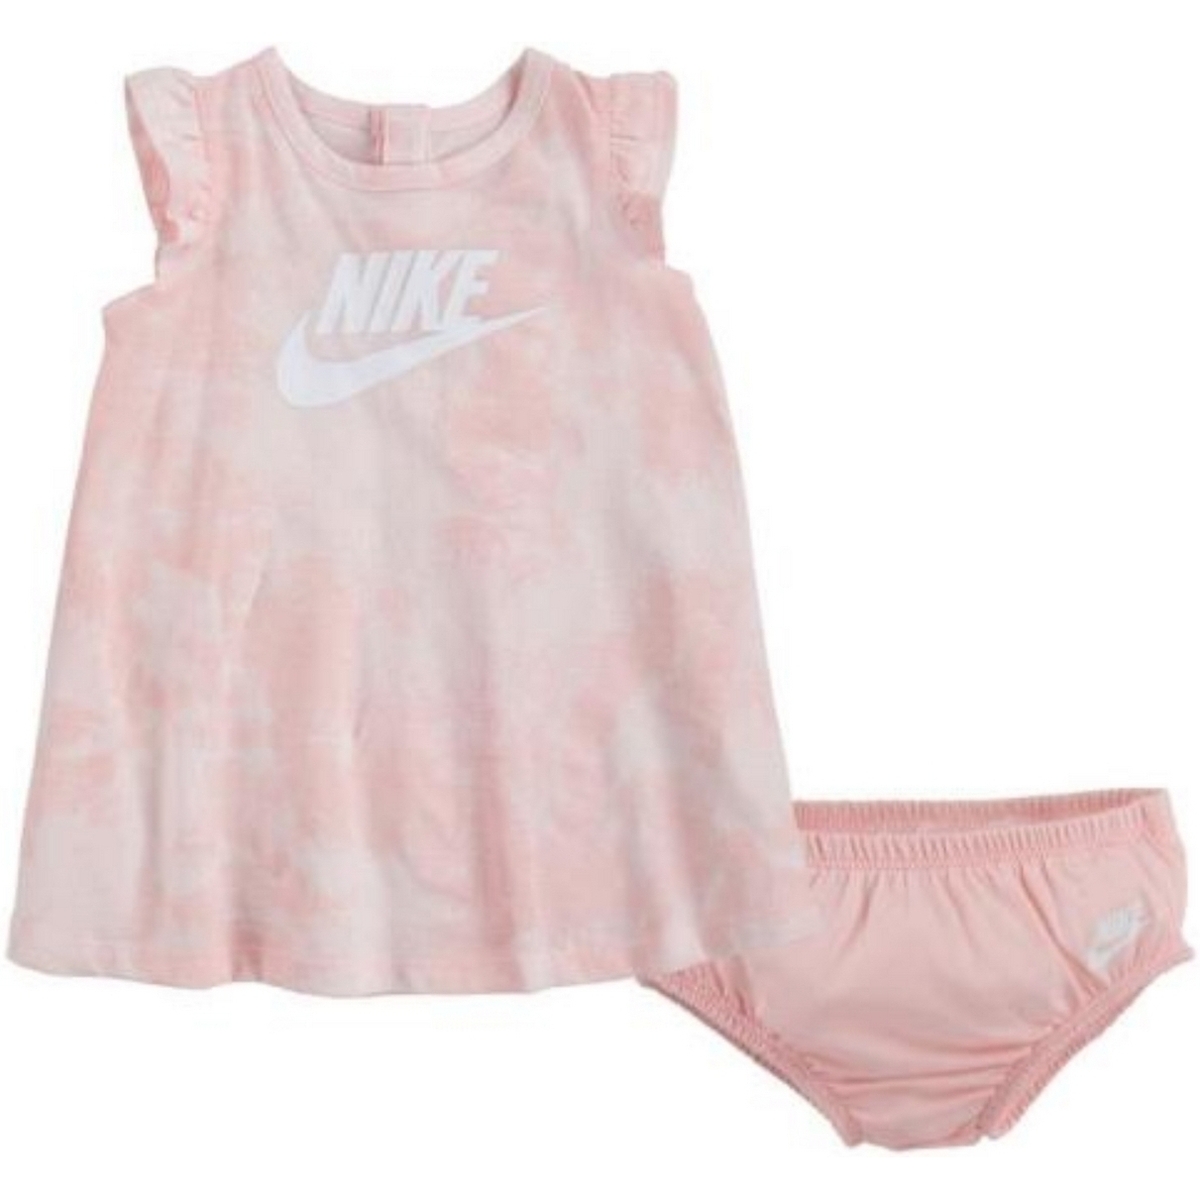 Vêtements Enfant Part of atmos "We Love Nike" Pack included two Nike Air Max 06H817 Rose